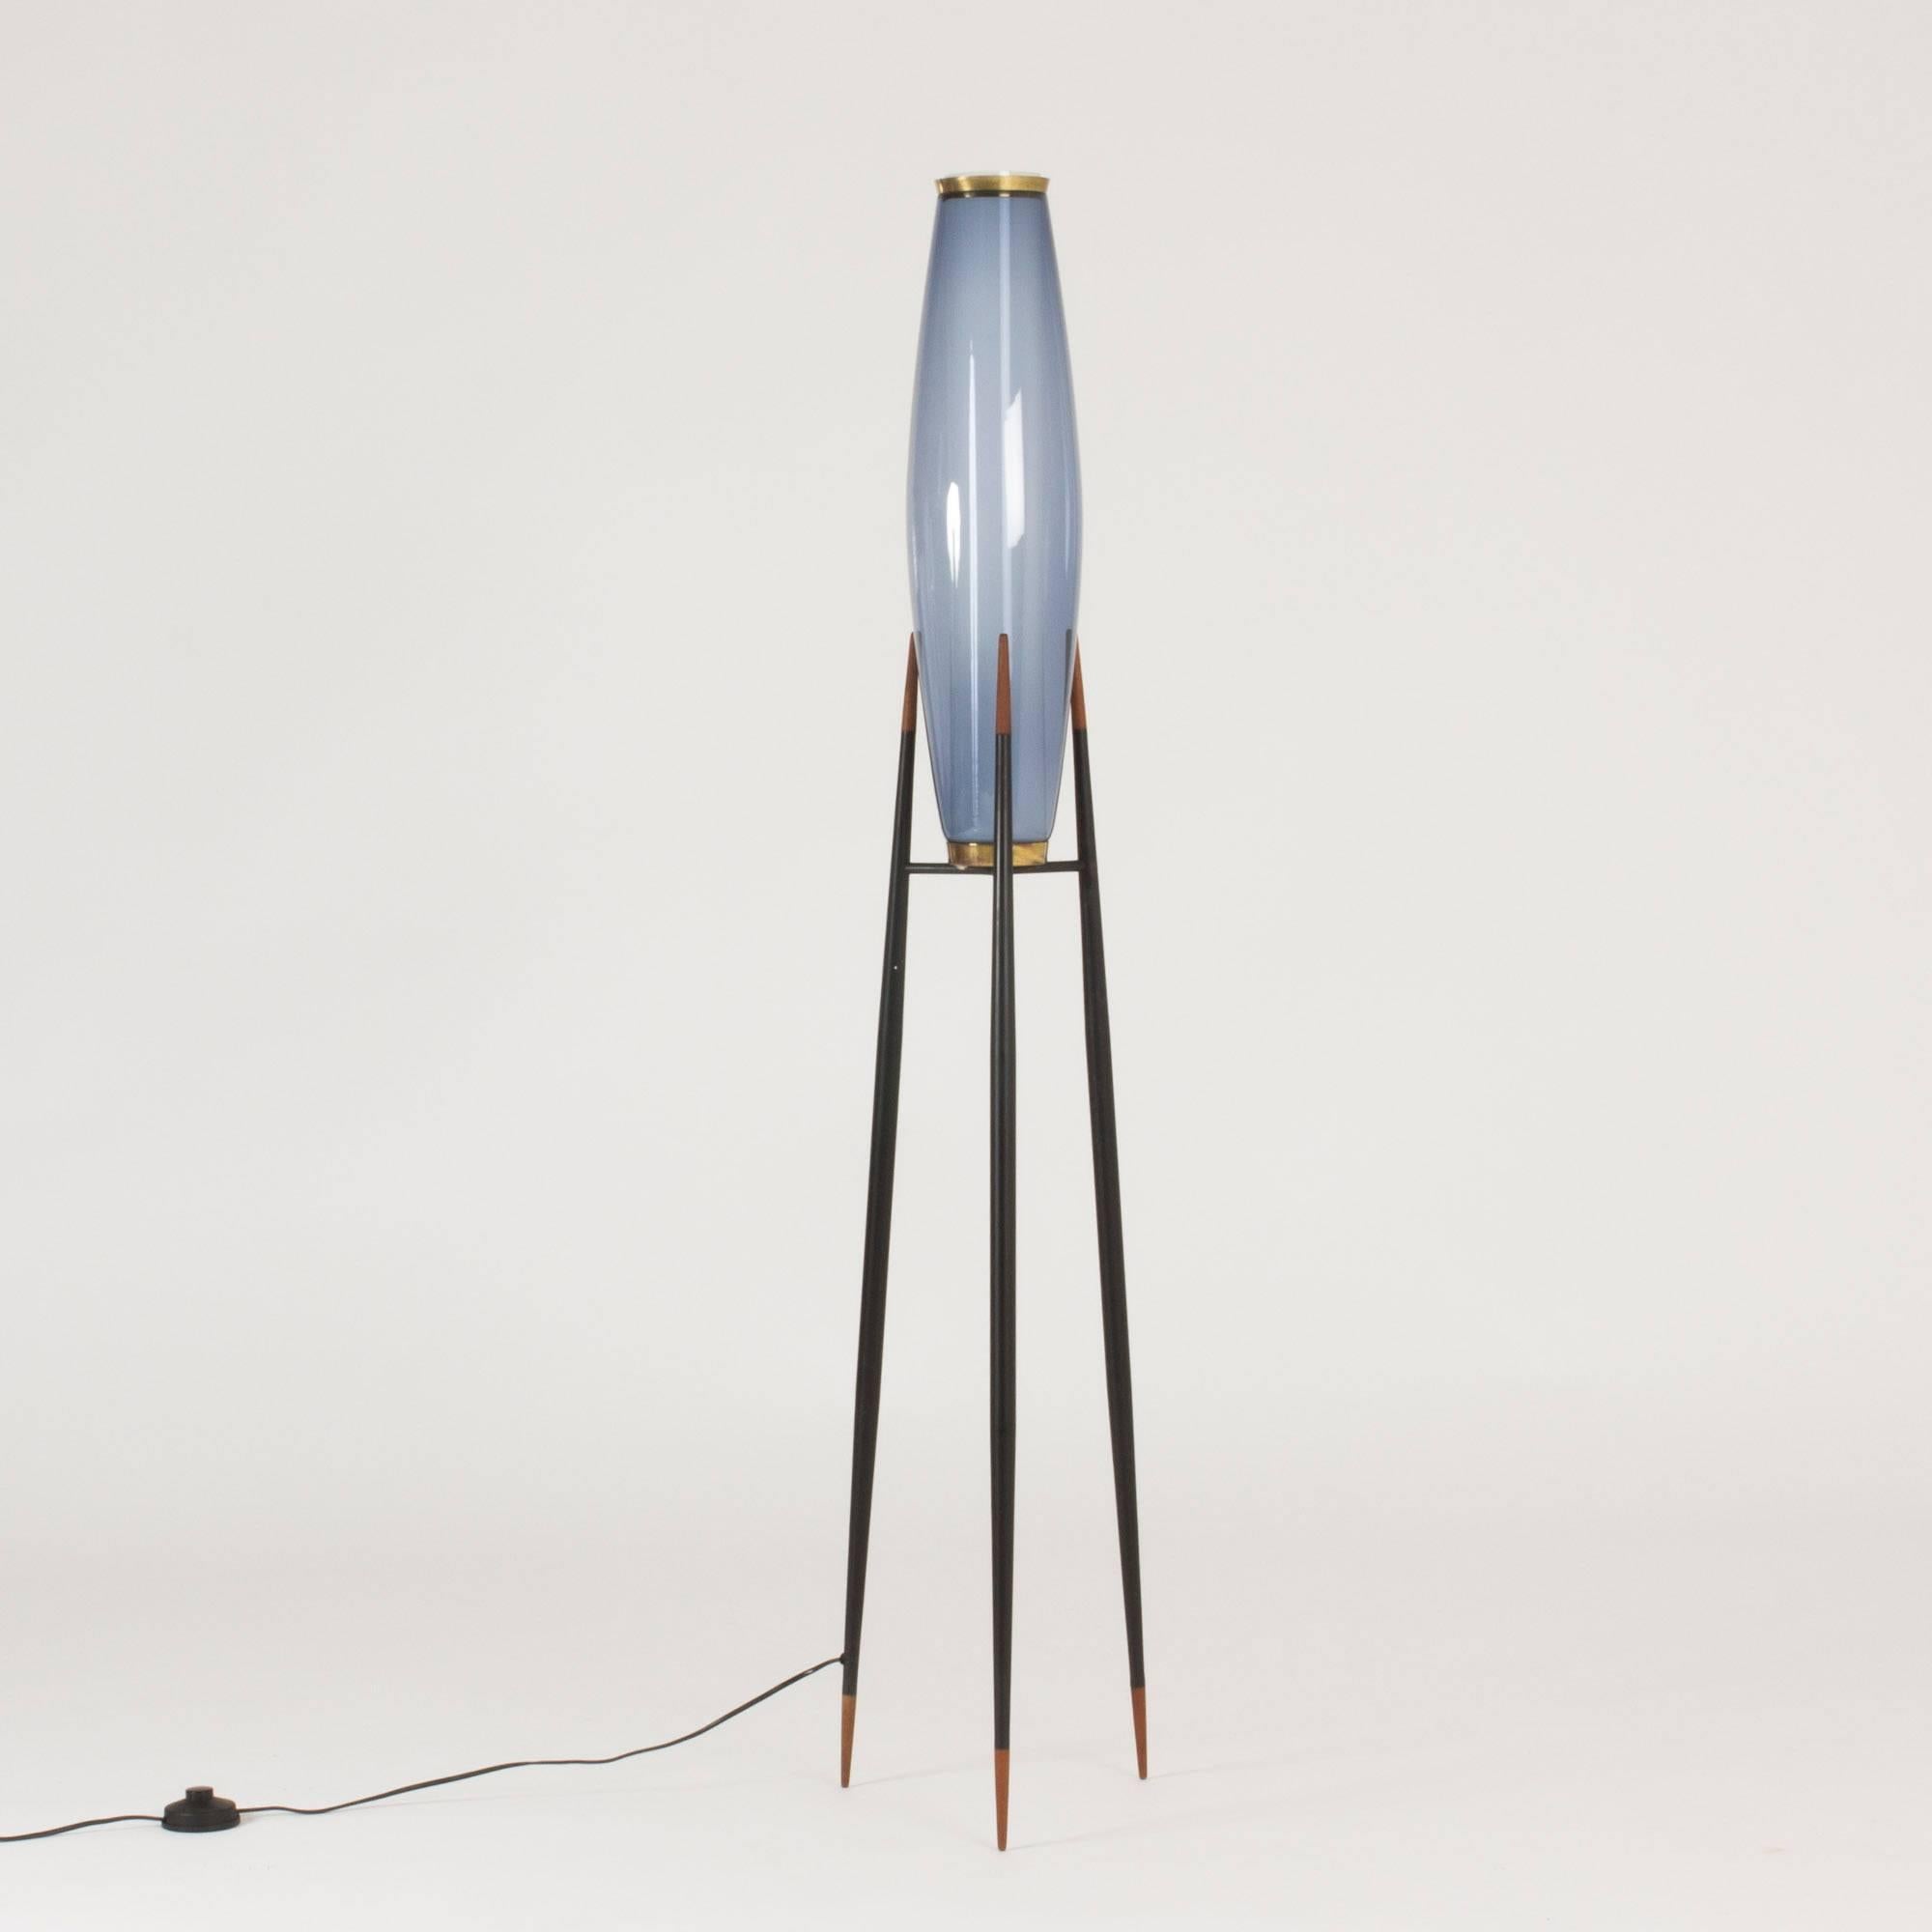 Stunning floor lamp by Svend Aage Holm Sørensen, made of black lacquered metal with teak and brass details. Inner opaline glass shade and an outer Smokey blue. A remarkable floor lamp with its large light on spindly legs. New wiring.